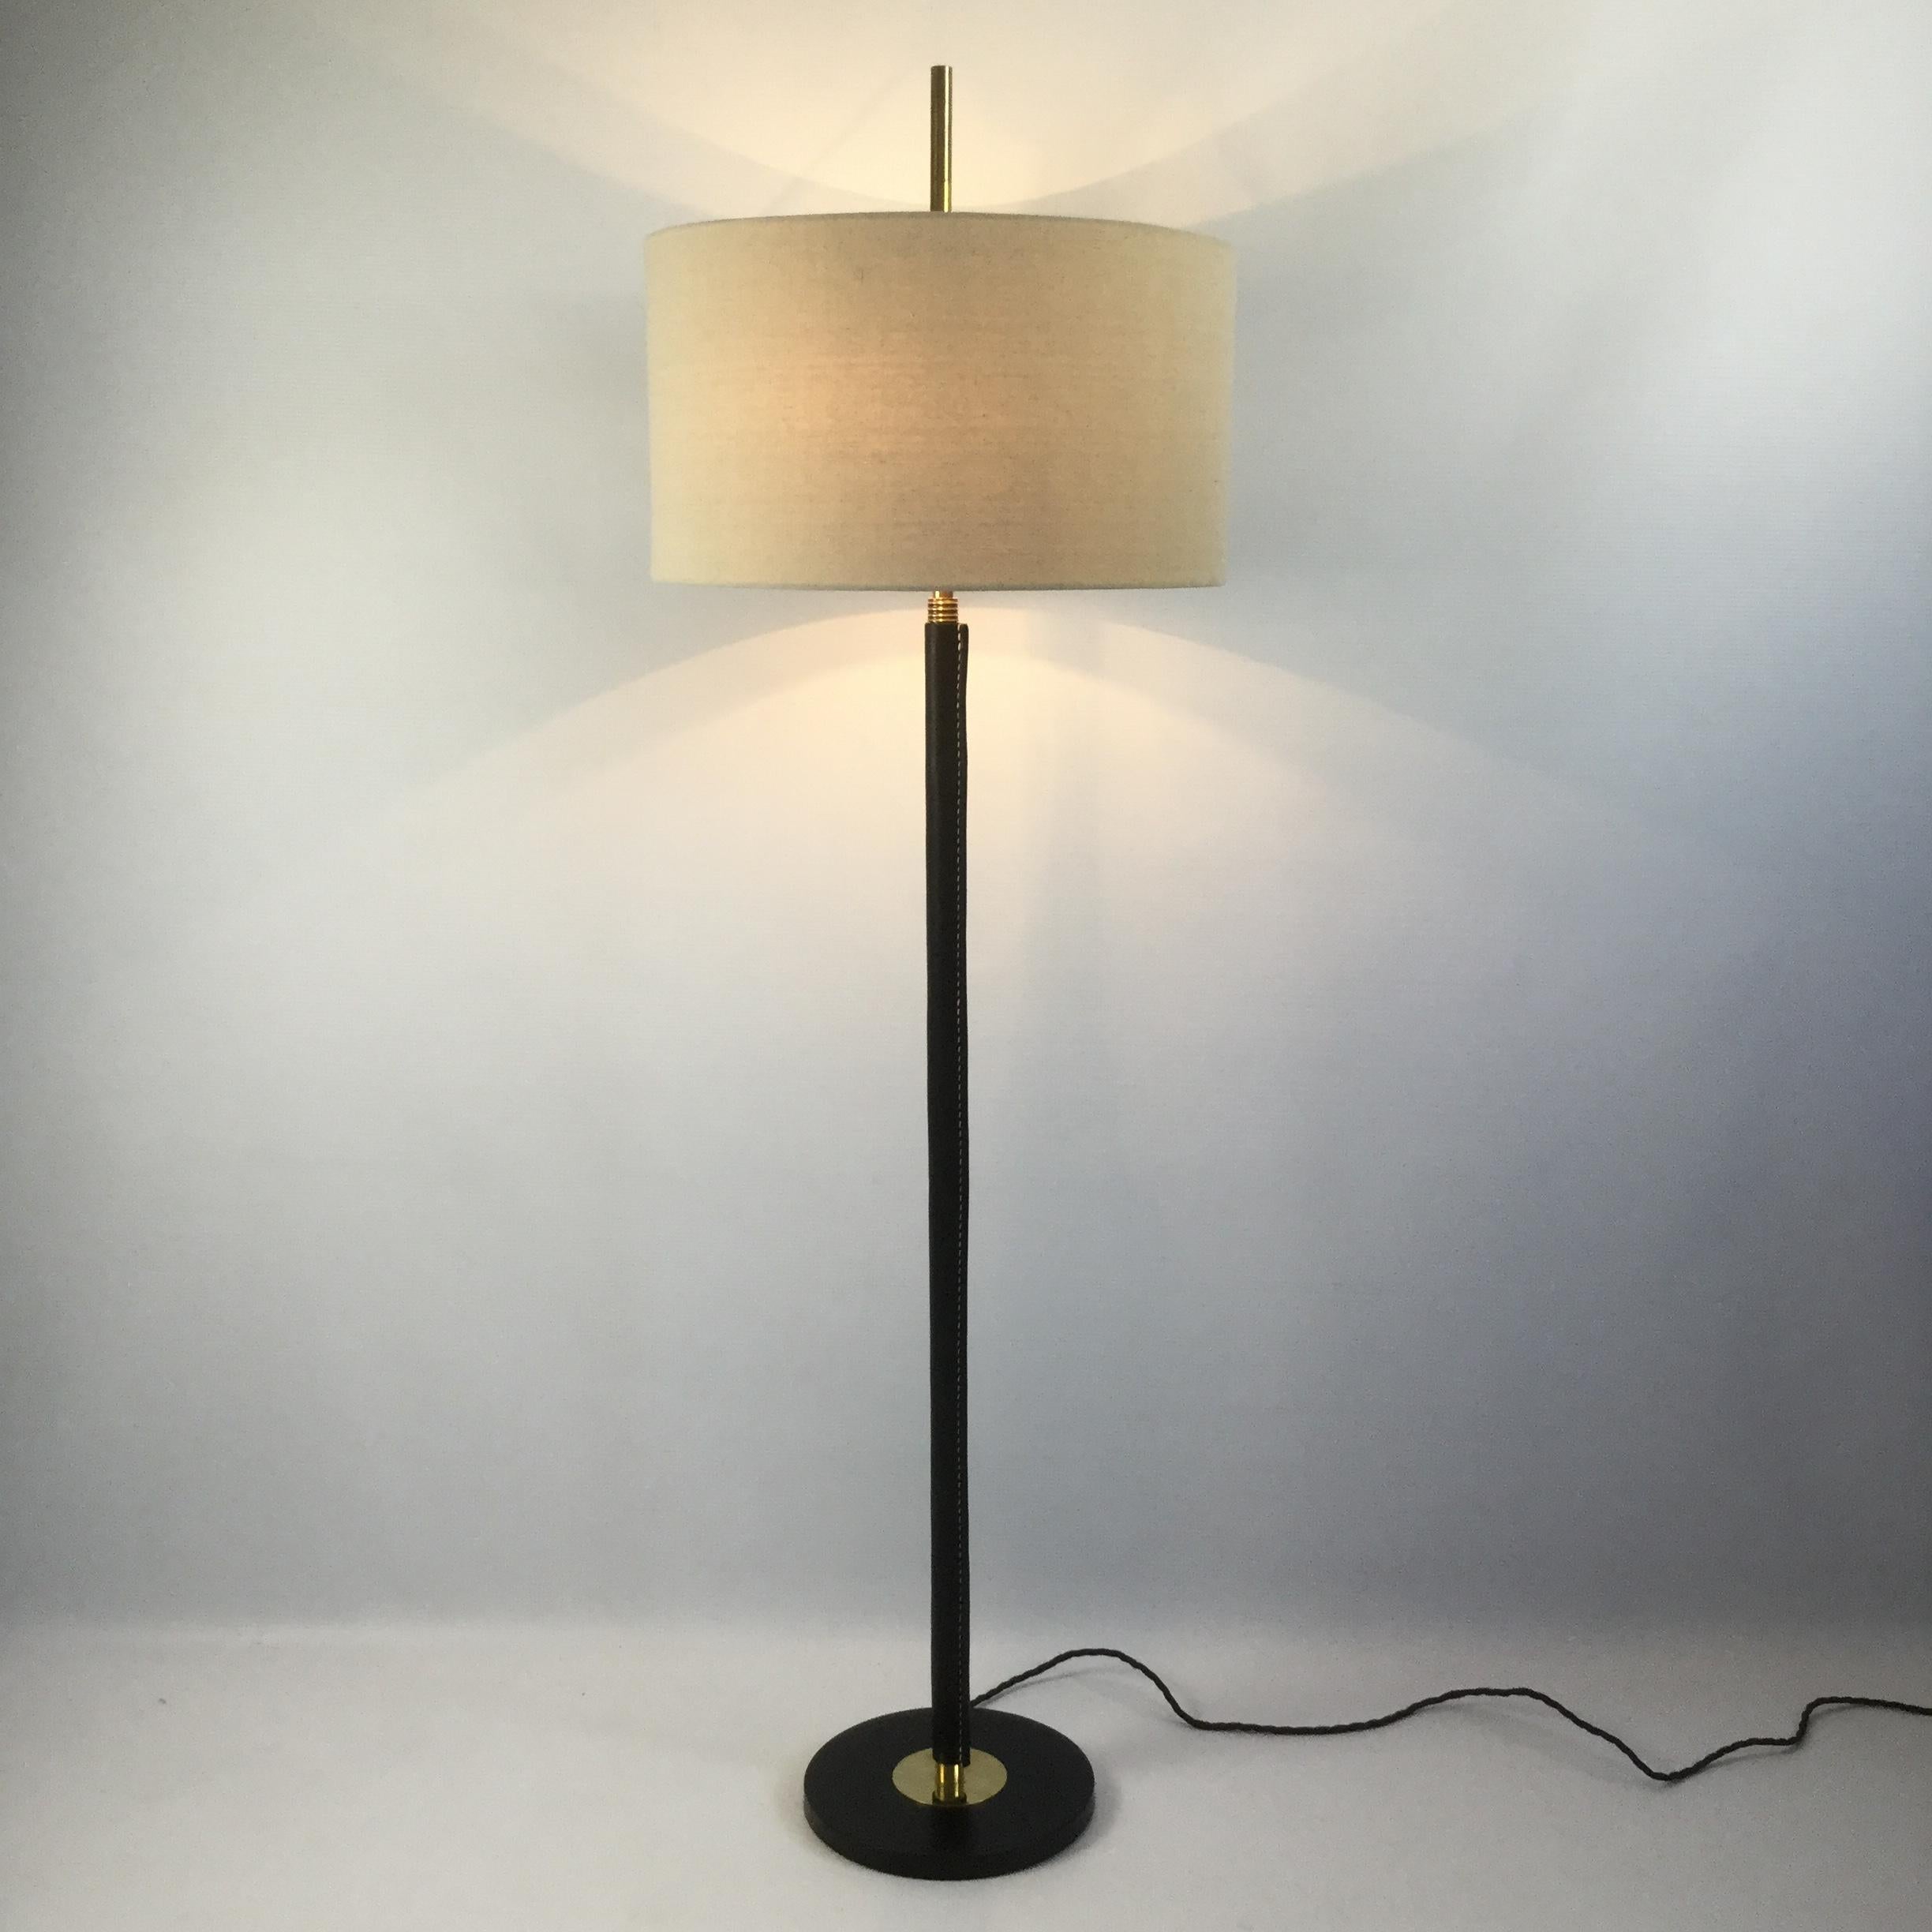 1950s extendable floor lamp in brass in a manner of Jacques Adnet with leather-wrapped finish redone by a professional saddler using a black full-grain leather.
New beige linen lampshade, rewired with insulating fabric cable, double switch.
